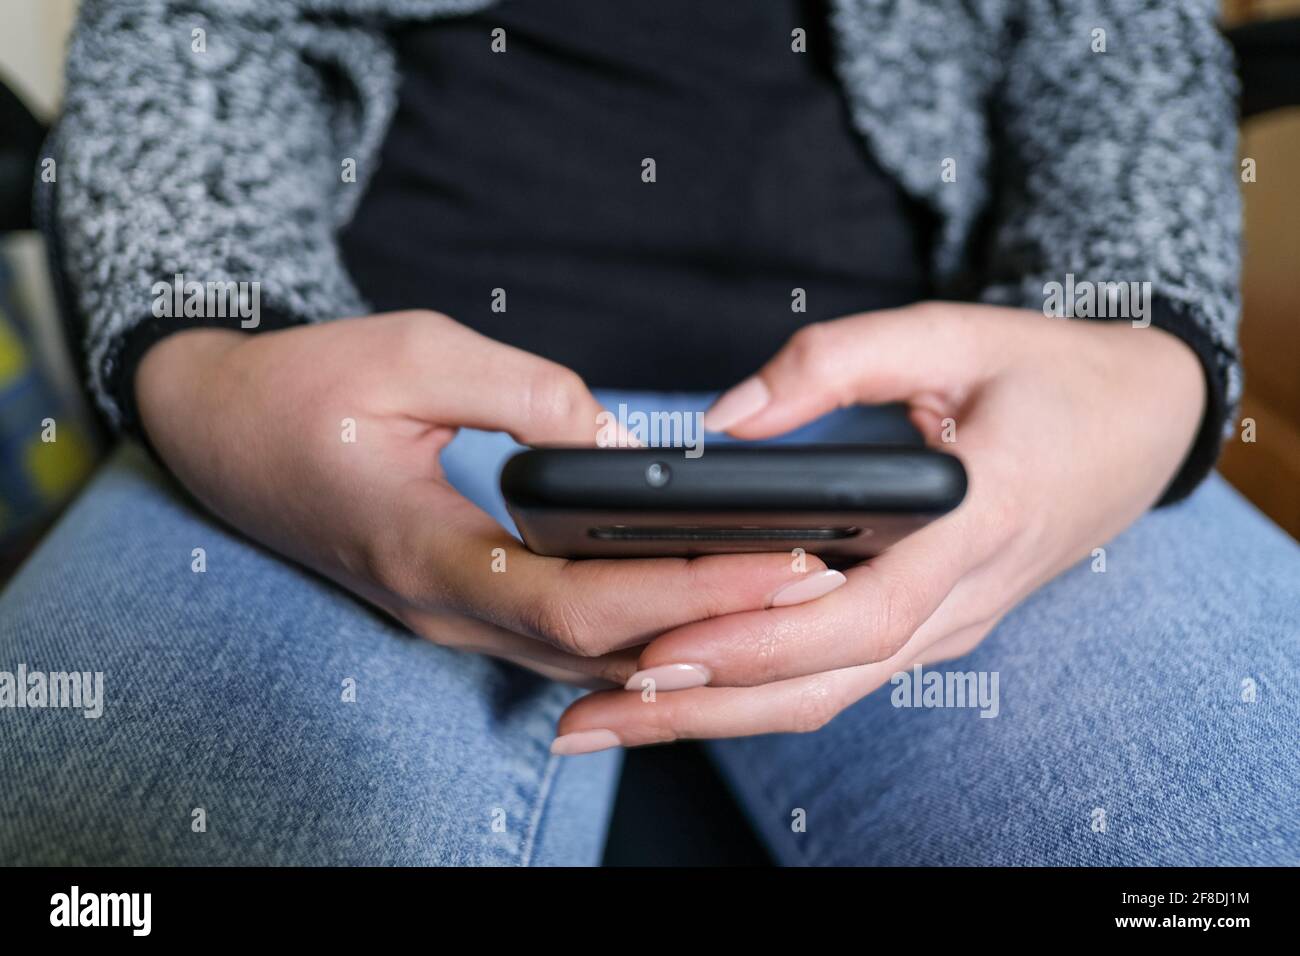 Woman using smartphone for messaging chat on a smartphone,social network tech addiction Stock Photo